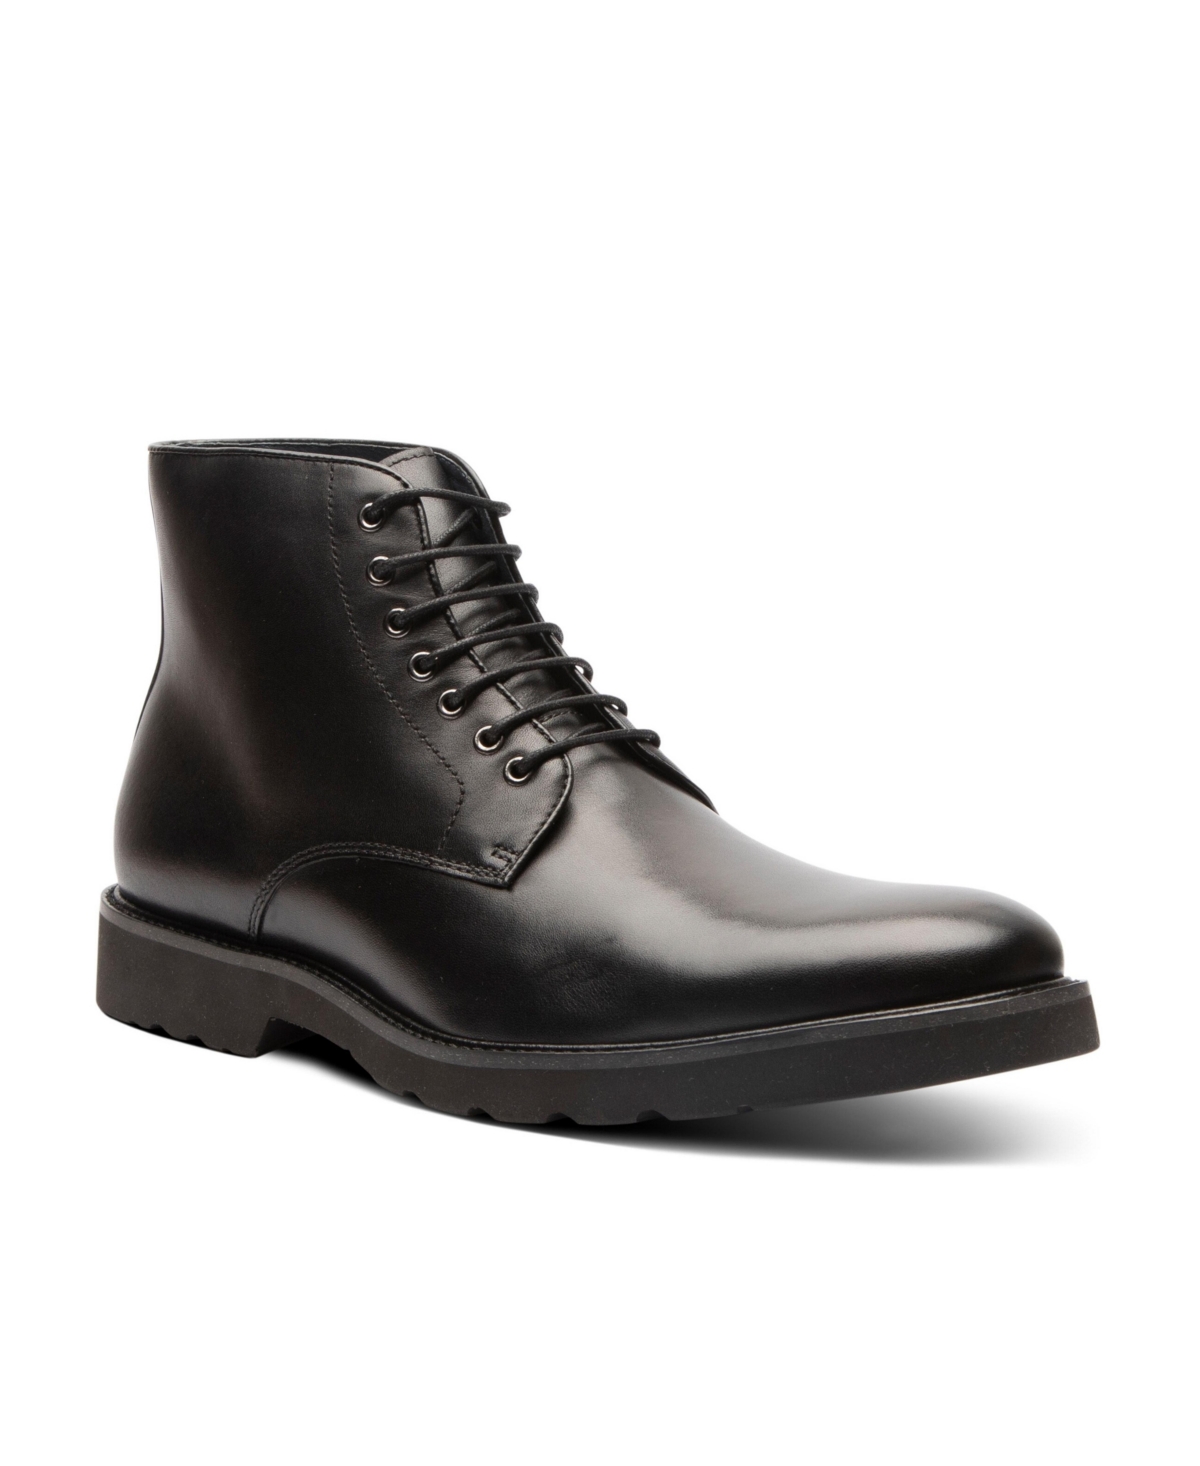 BLAKE MCKAY MEN'S POWELL BOOT DRESS CASUAL LACE-UP BOOTS